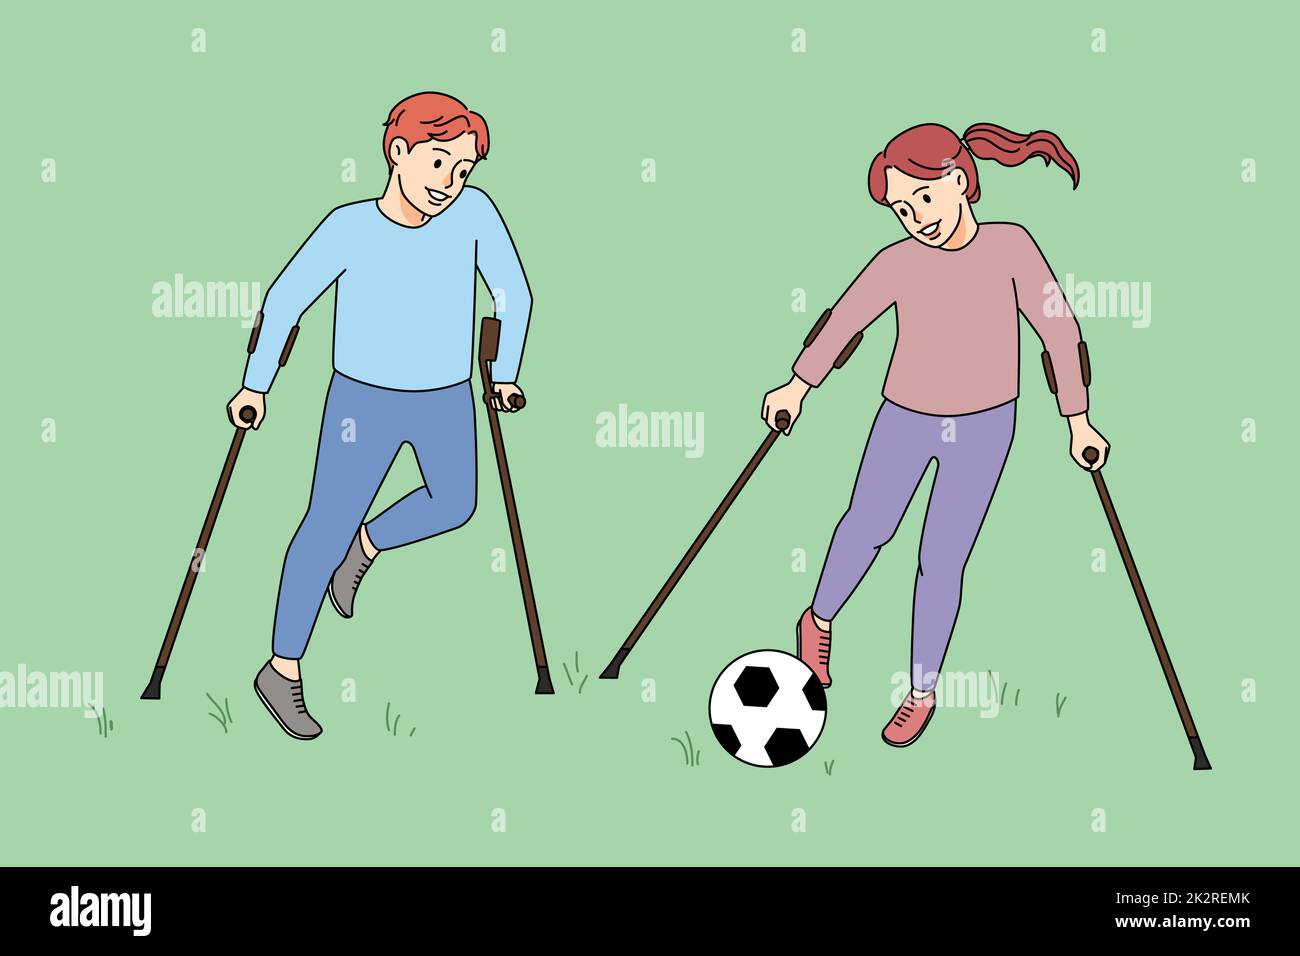 Happy children with physical disabilities playing football Stock Photo